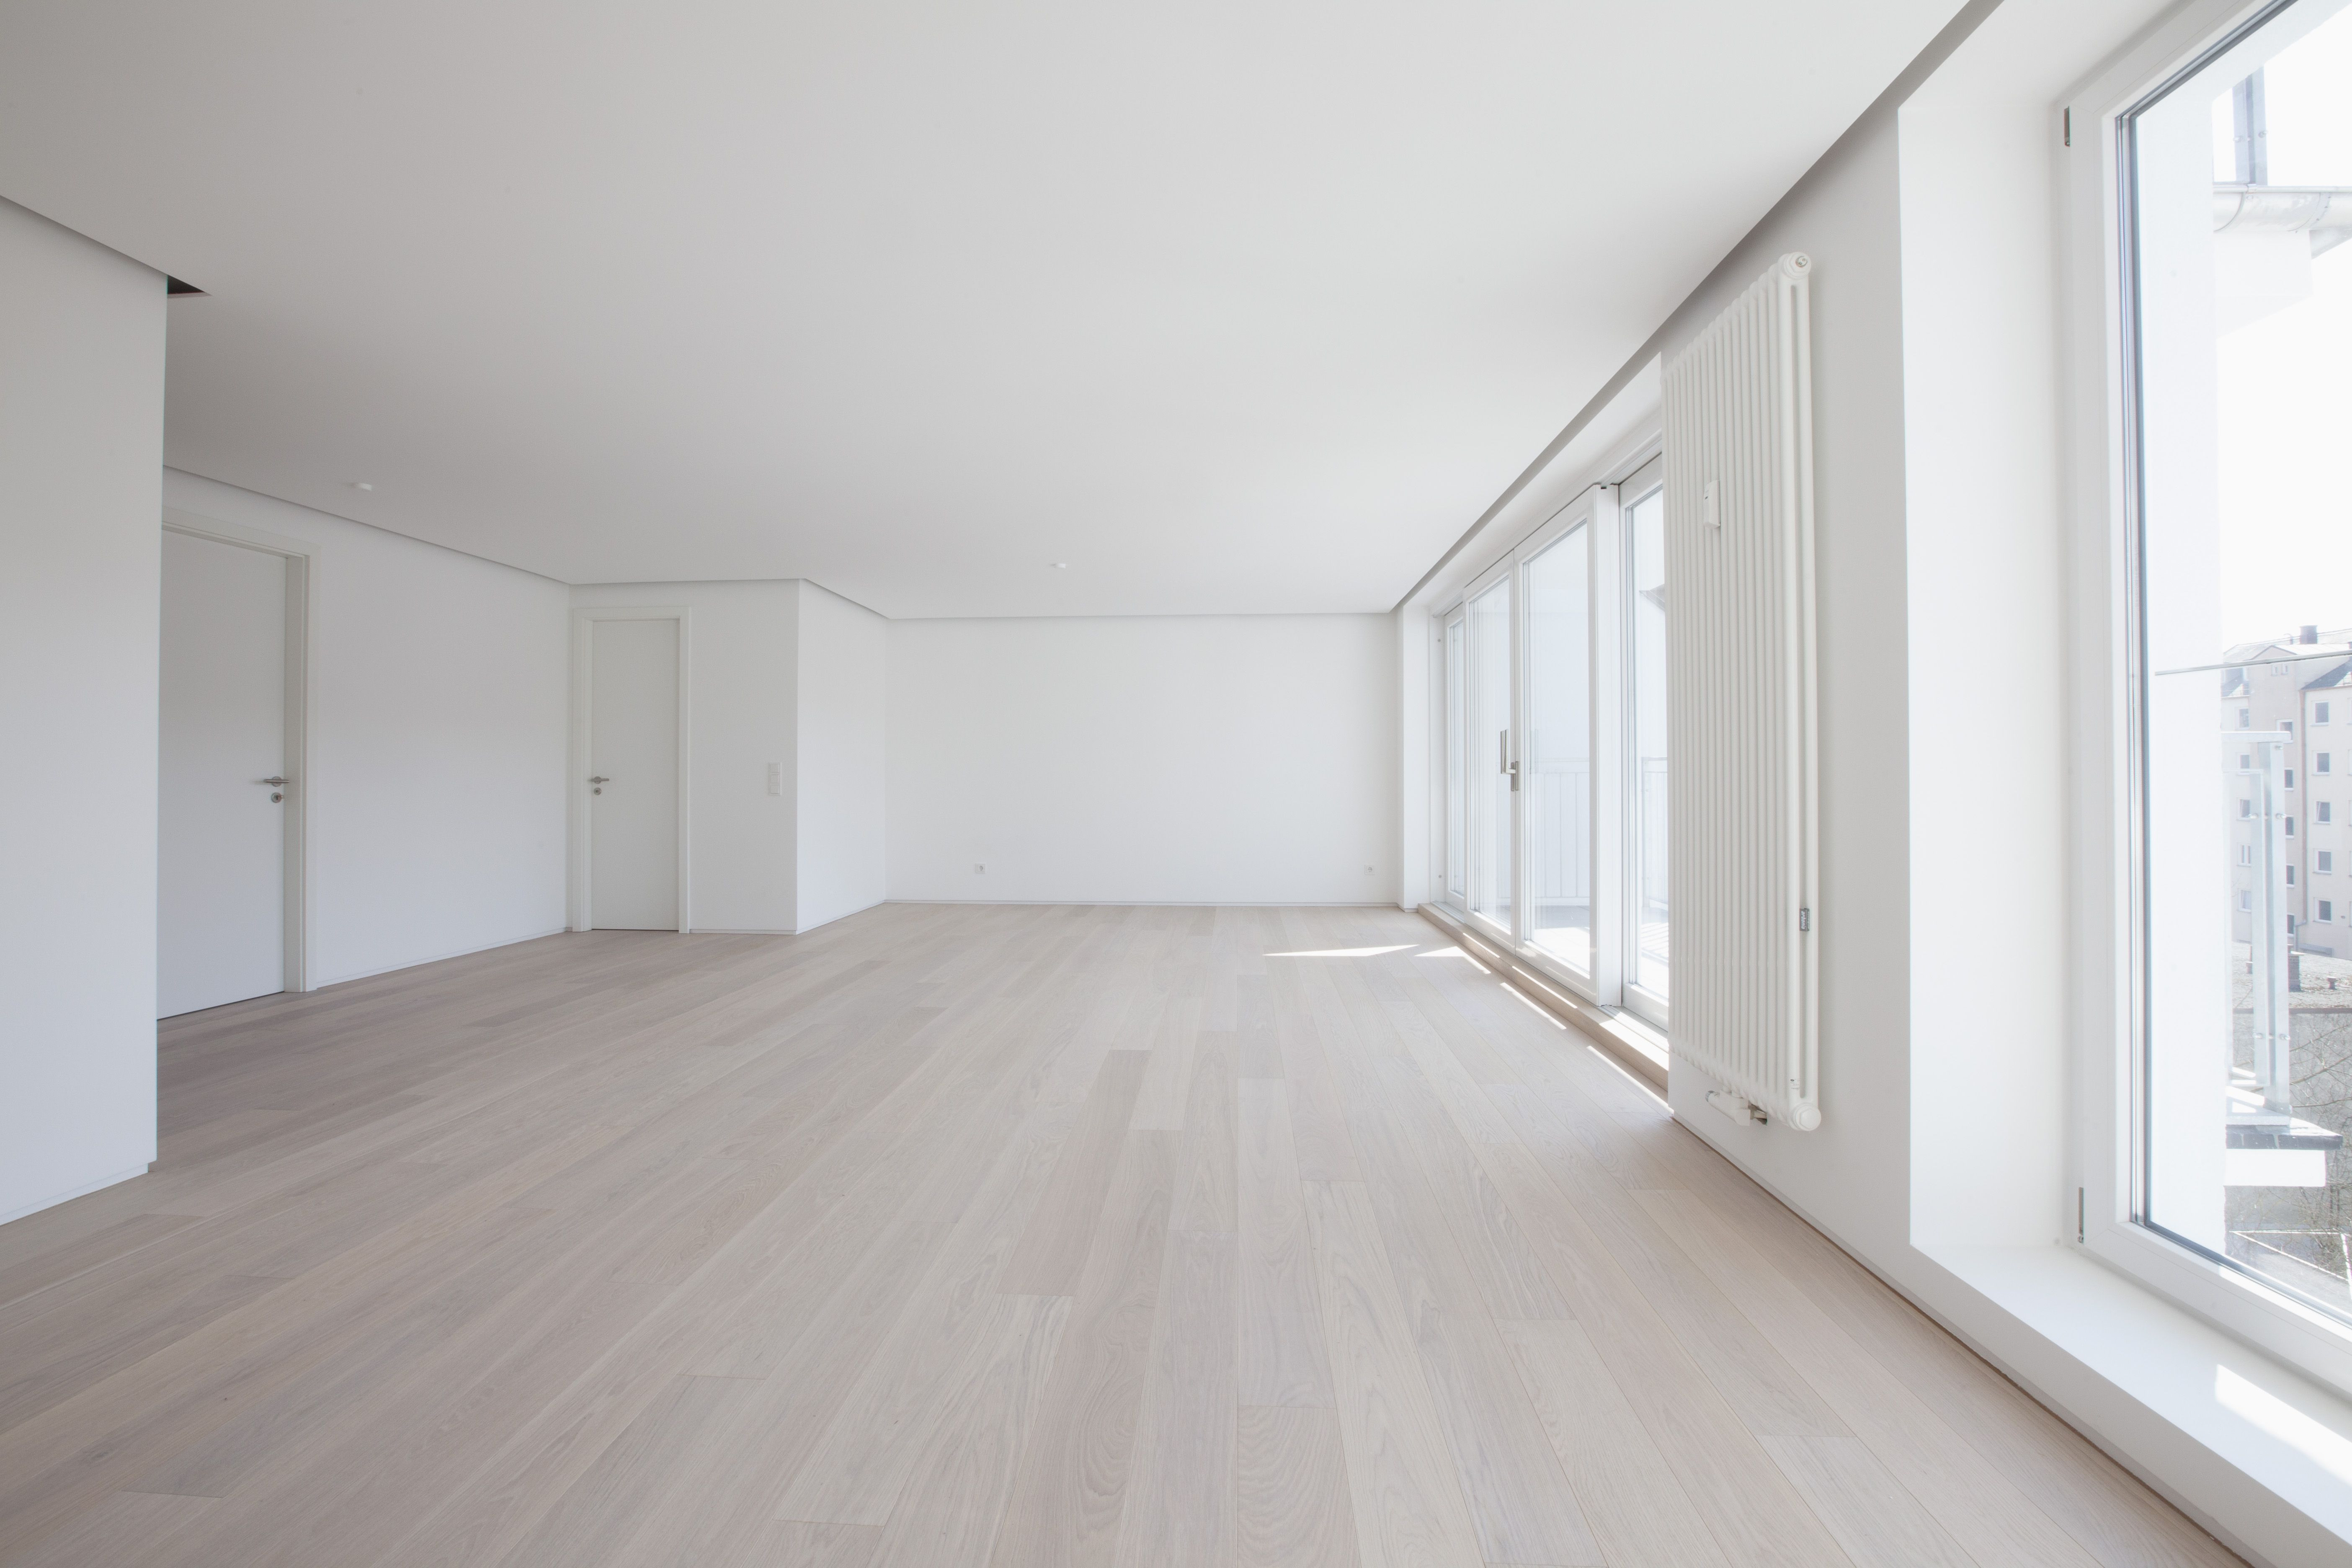 26 Recommended Dark Vs Light Hardwood Floors 2024 free download dark vs light hardwood floors of basics of favorite hybrid engineered wood floors with empty living room in modern apartment 578189139 58866f903df78c2ccdecab05